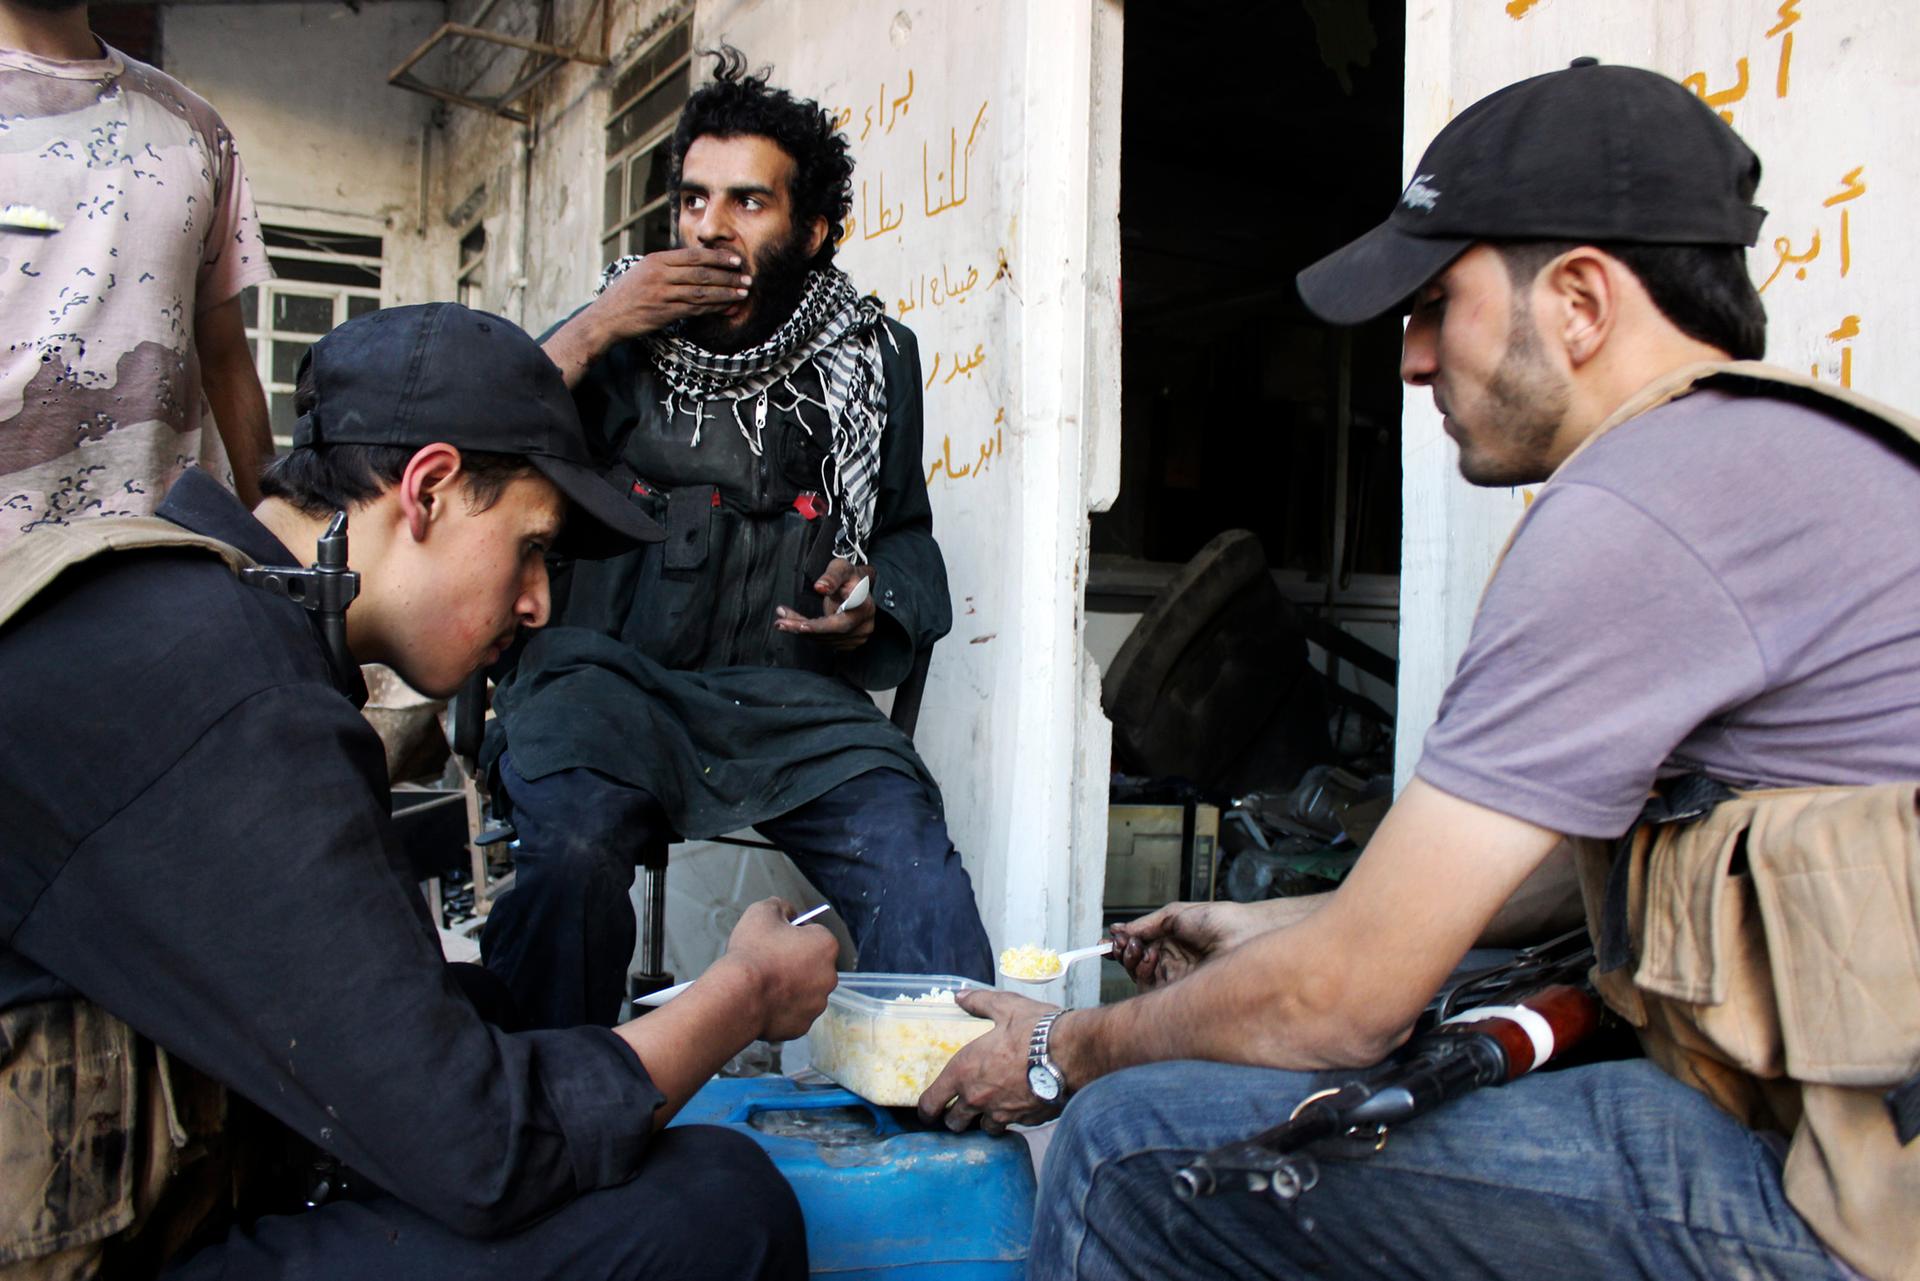 Rebel fighters eat in the Damascus suburb of Arbeen October 6, 2014.